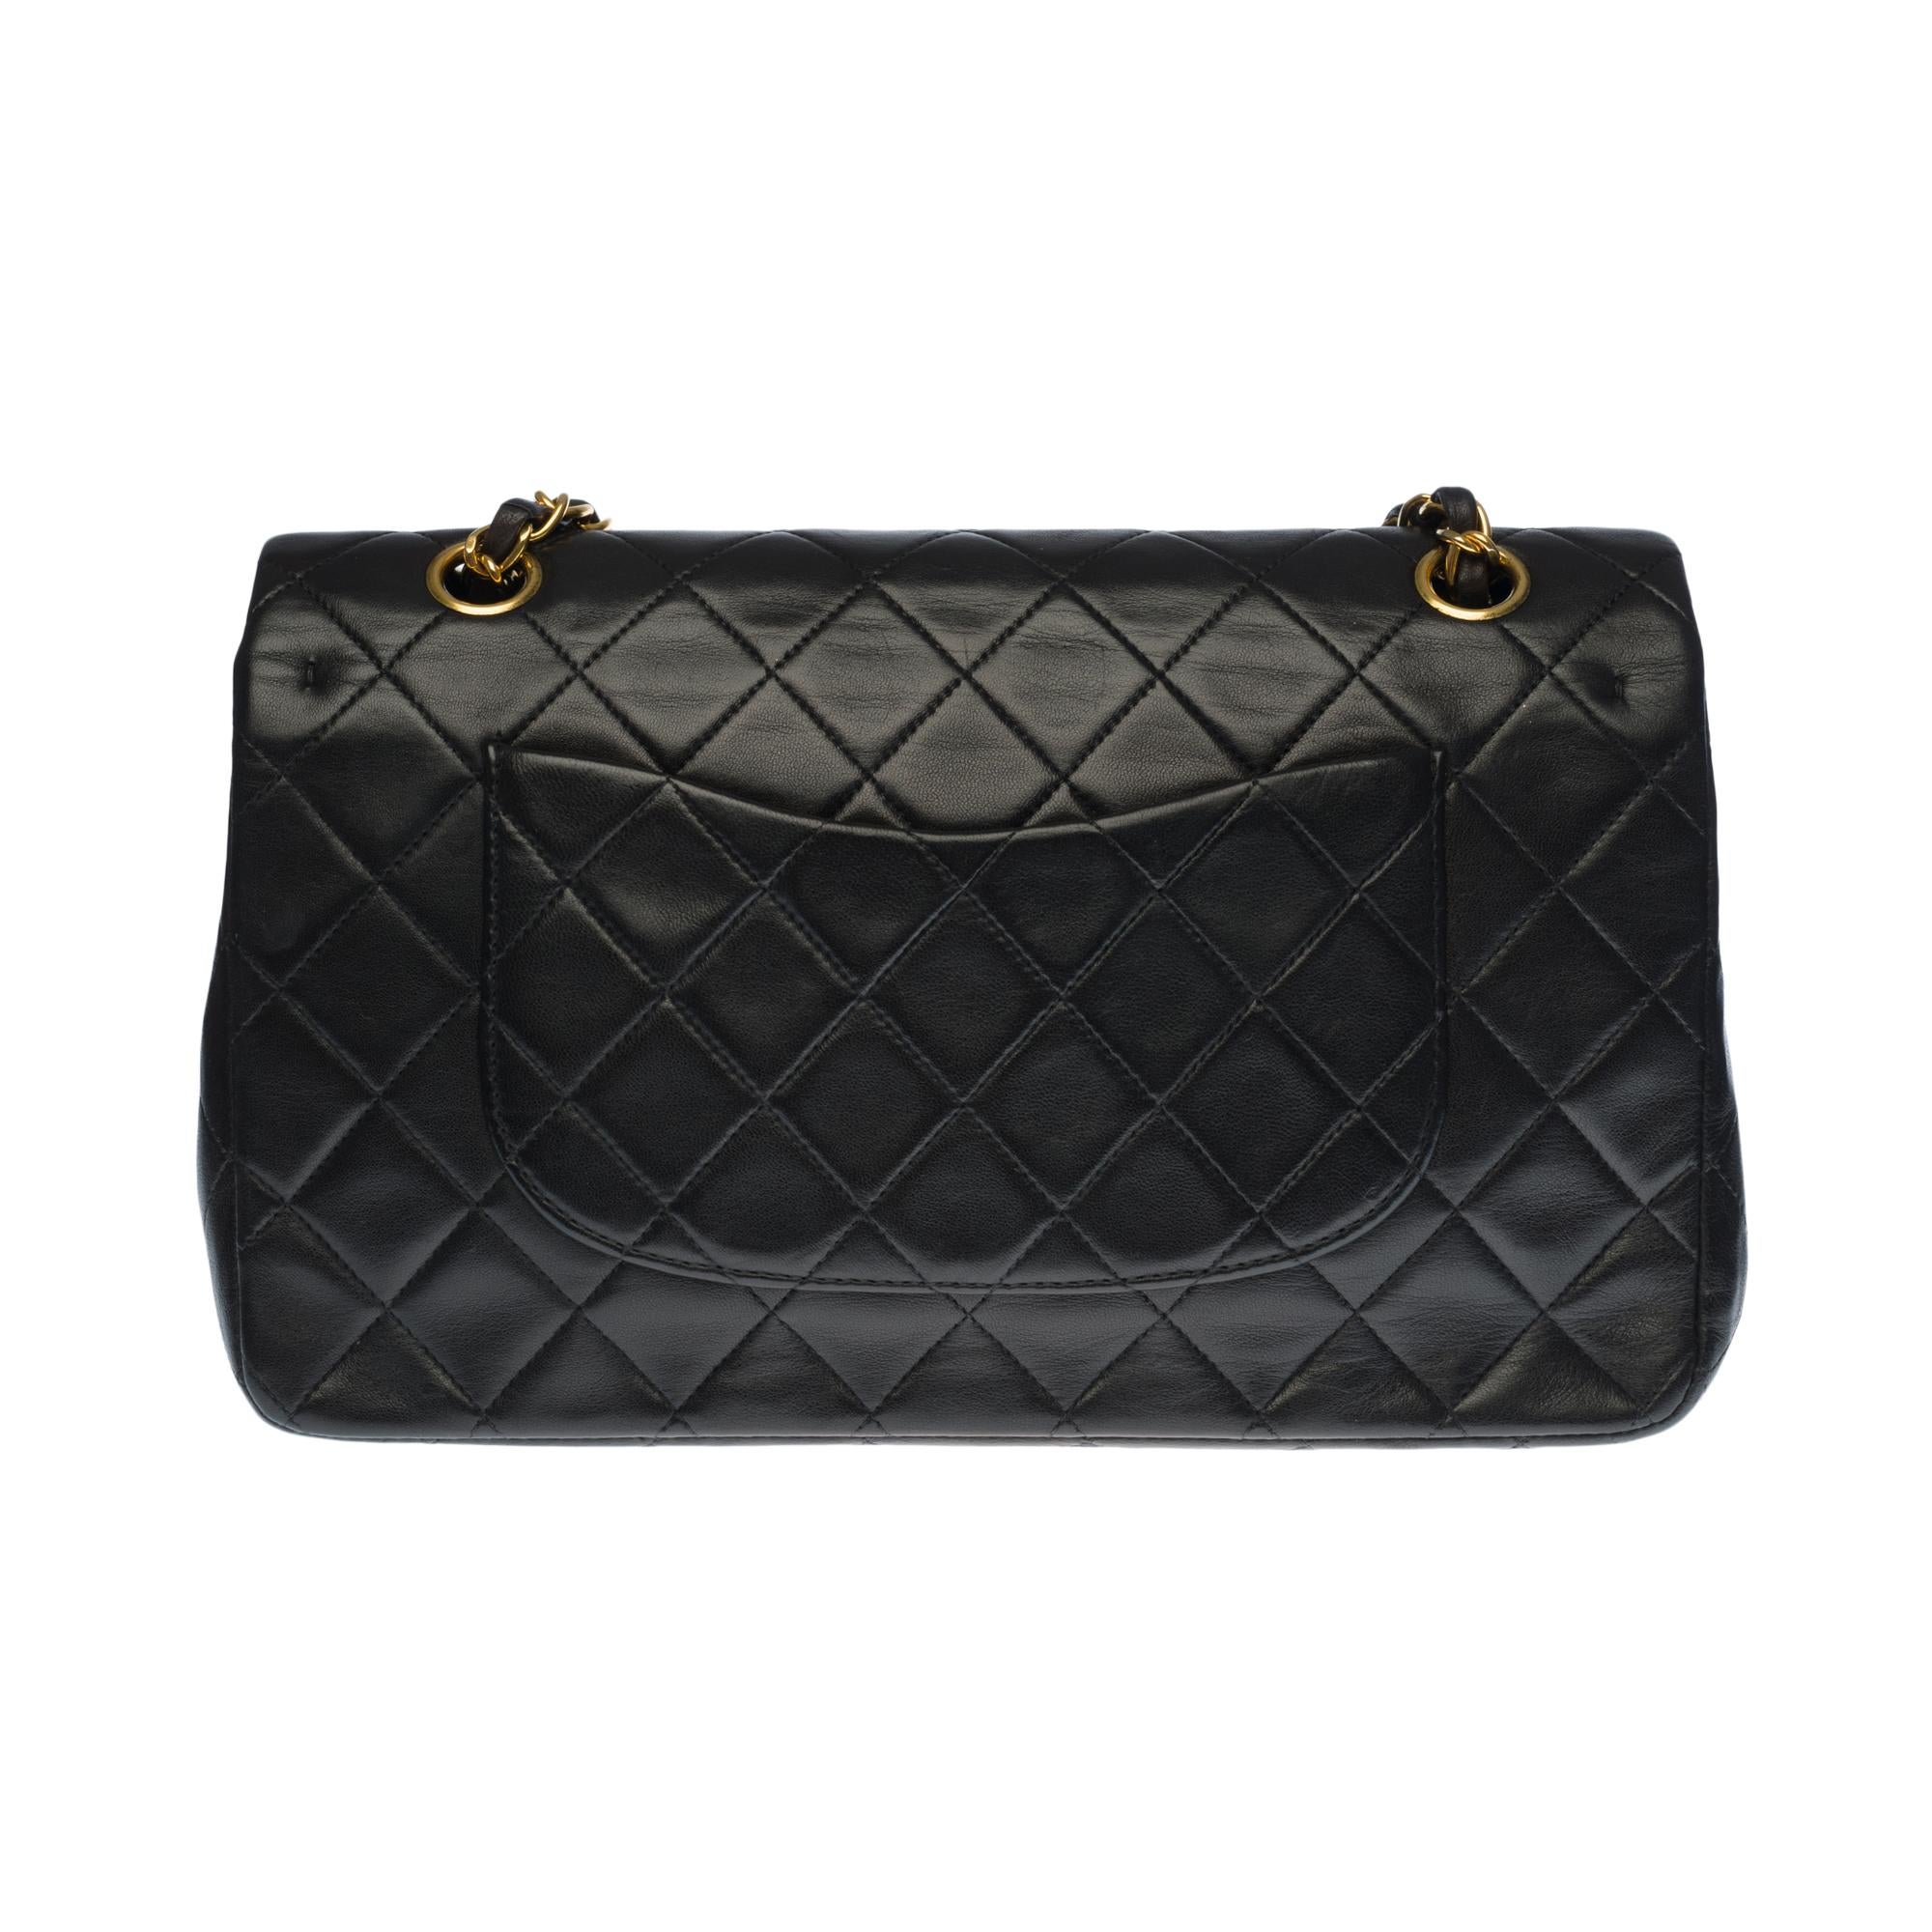 Beautiful Chanel Timeless Medium handbag with double flap in black quilted lambskin leather, gold-tone metal hardware, a gold-tone metal chain handle interwoven with black leather allowing a hand or shoulder support
Closure with gold metal flap
A